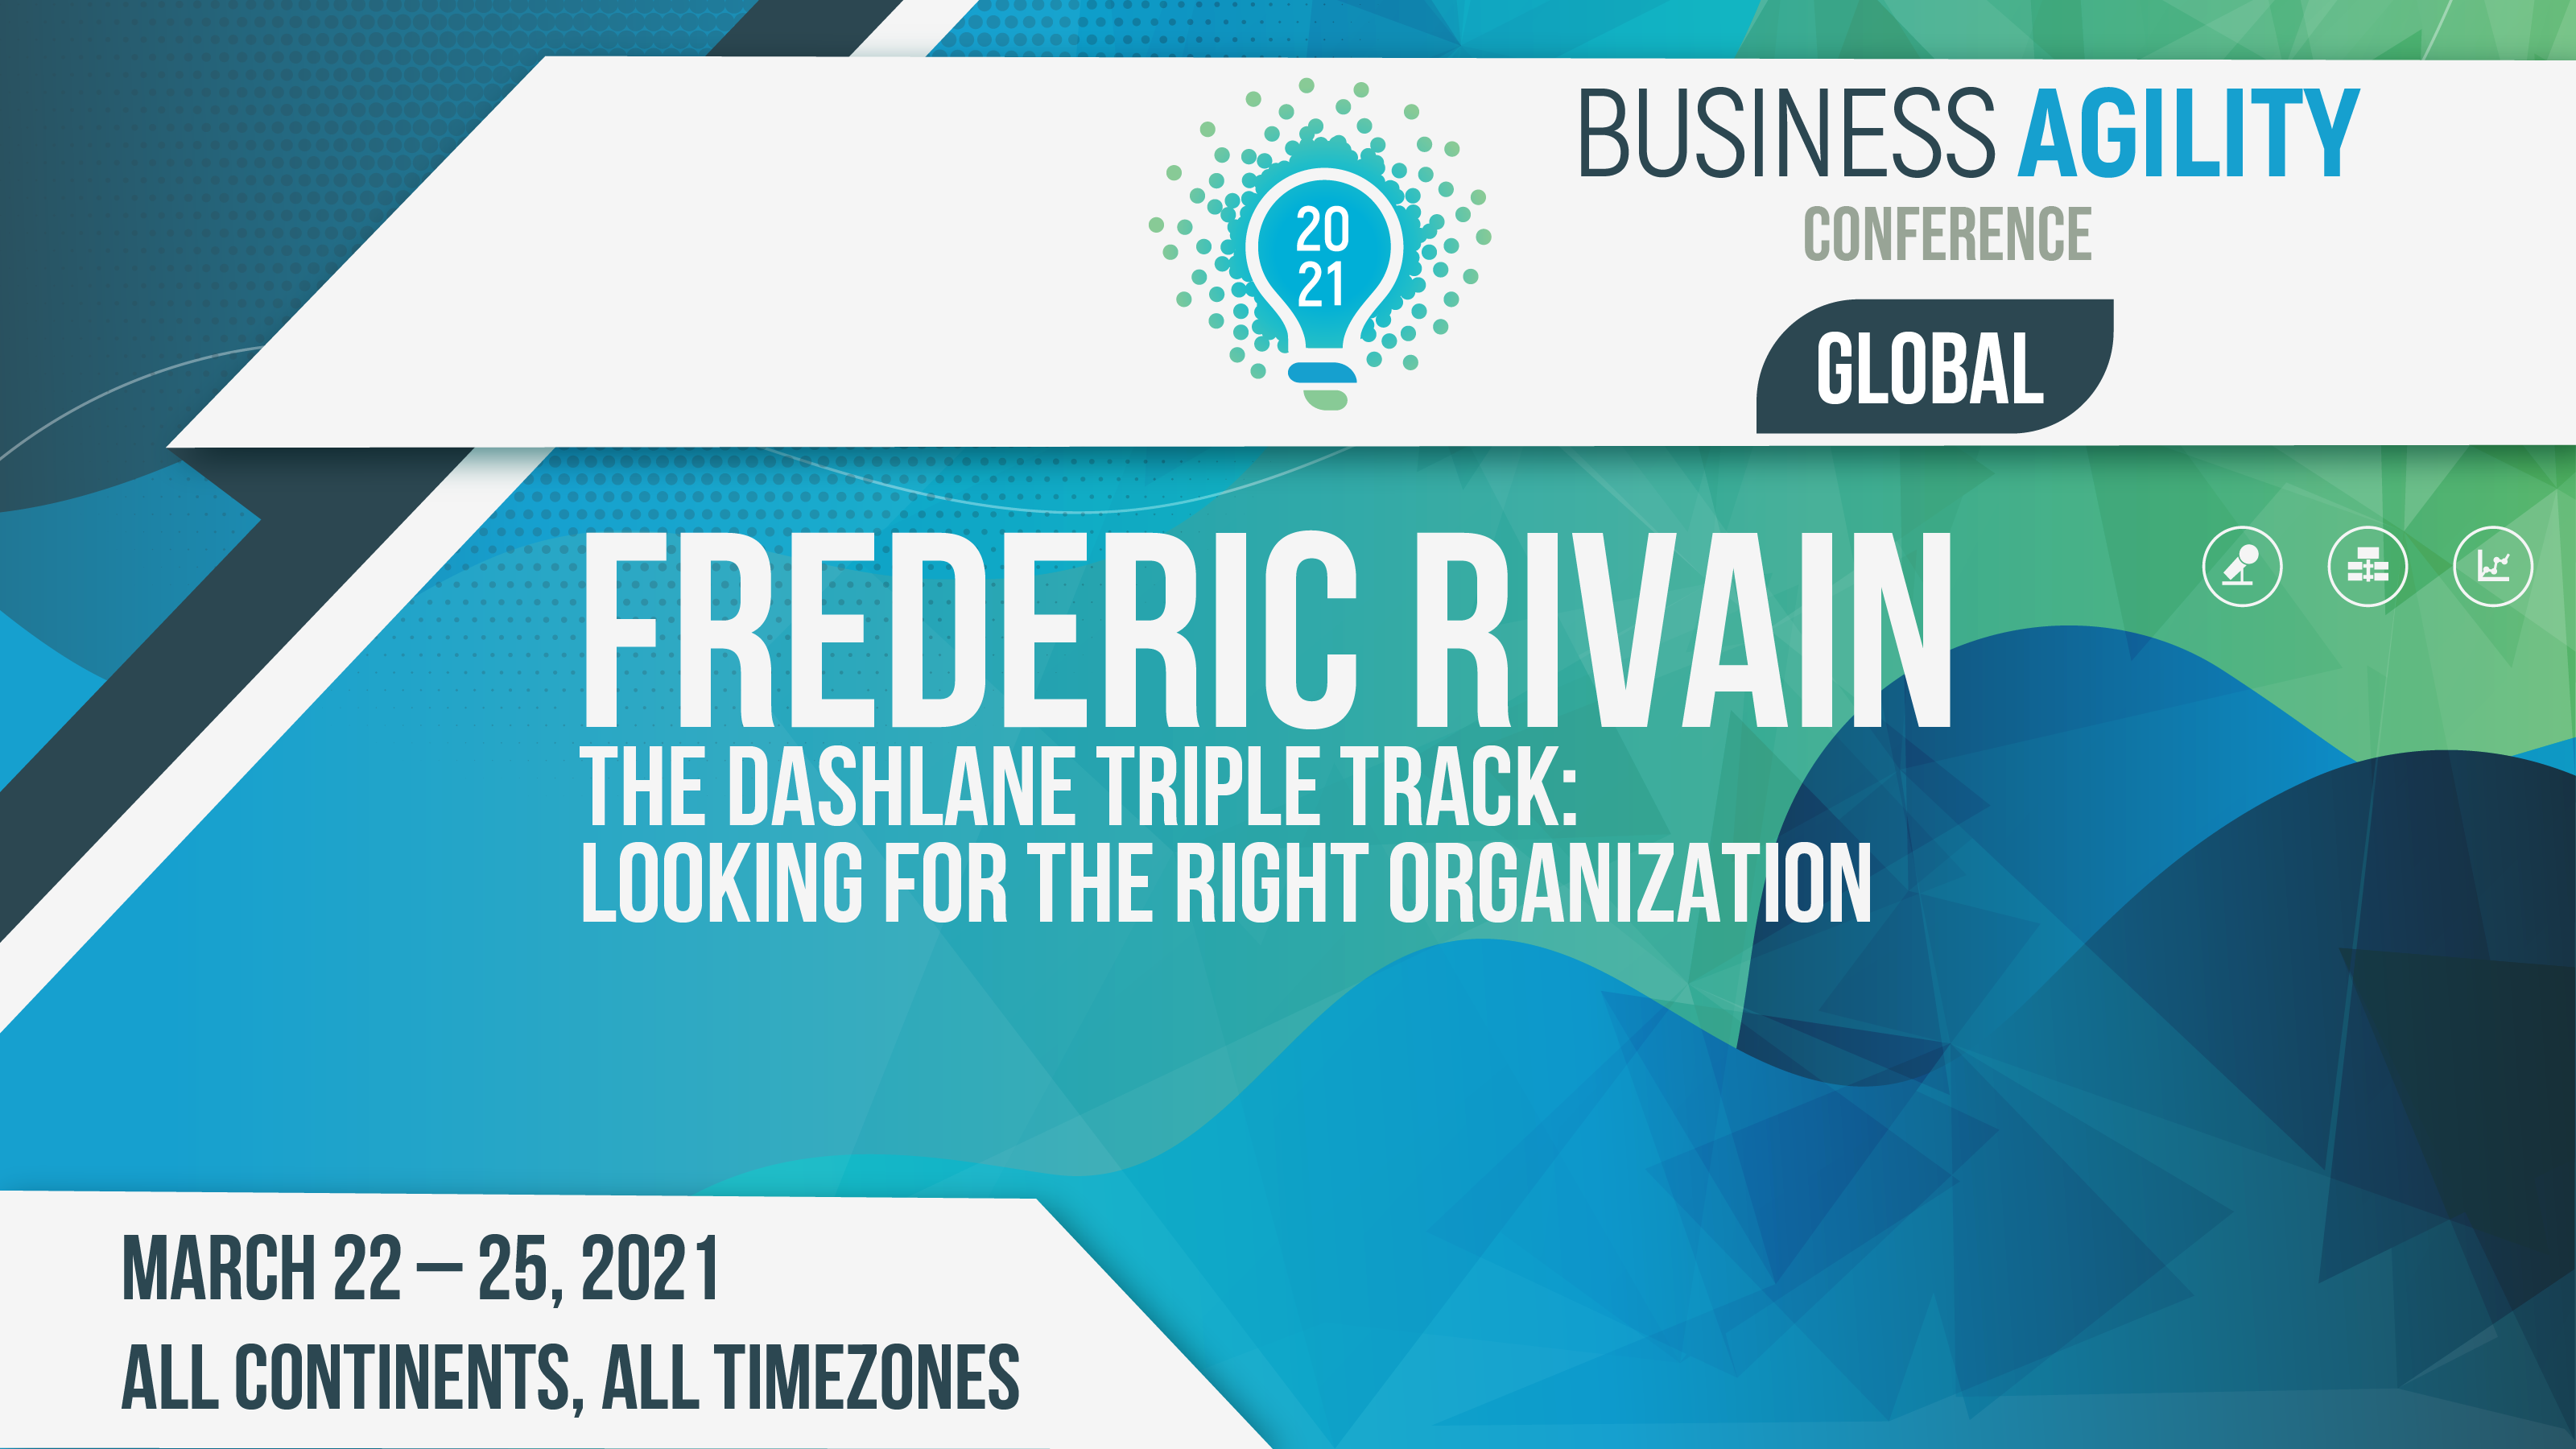 The Dashlane Triple Track: Looking for the Right Organization